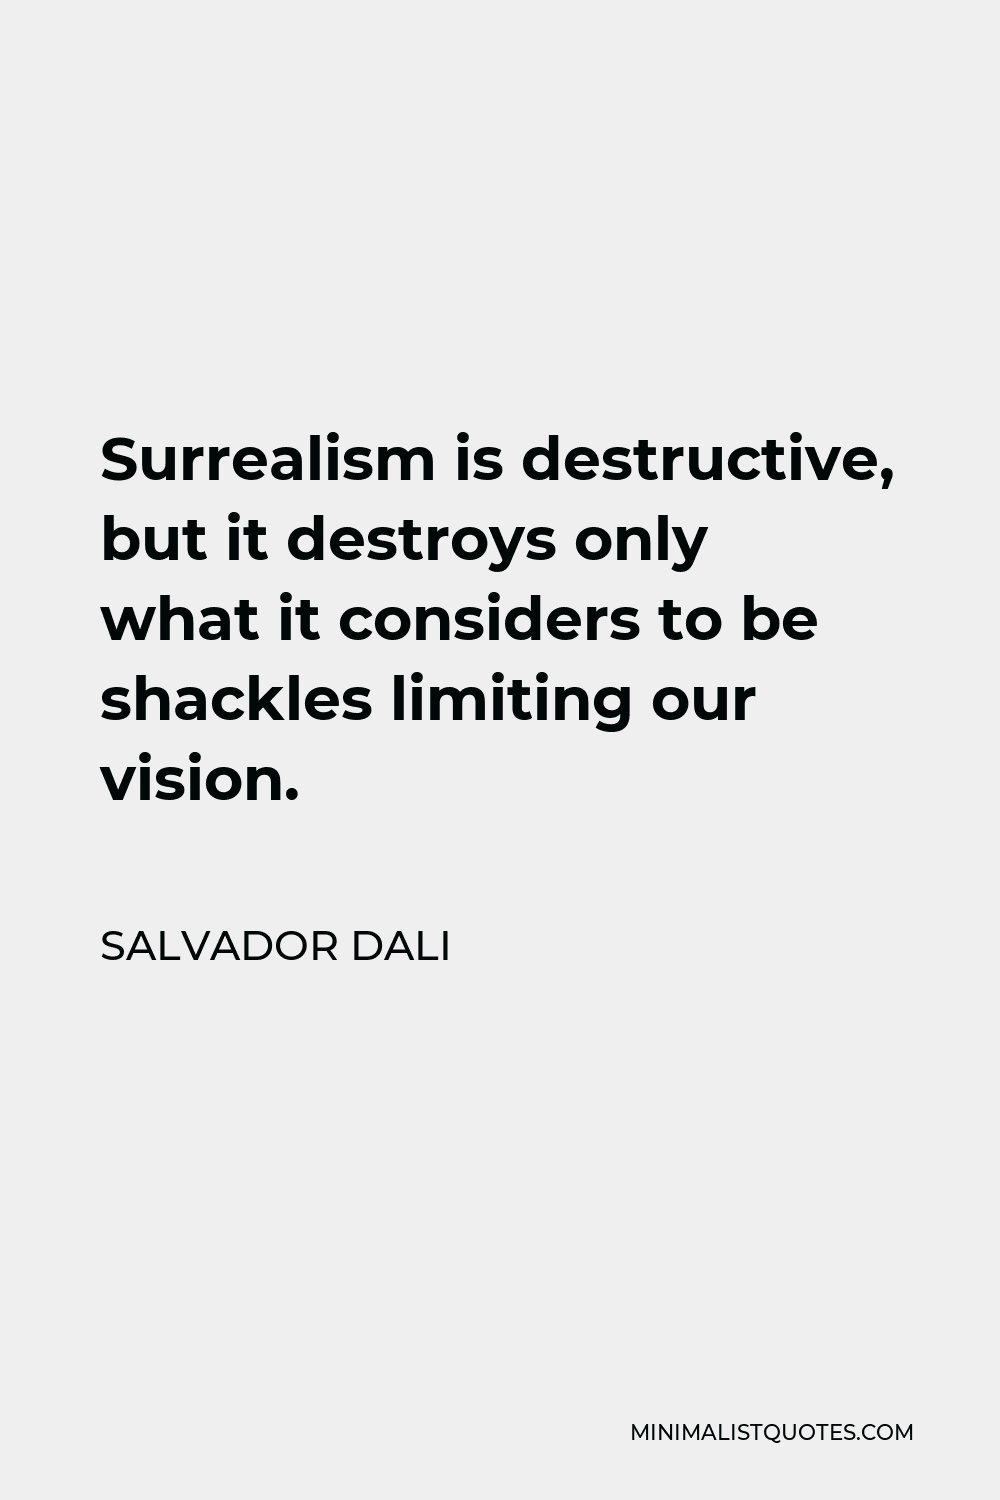 Salvador Dali Quote - Surrealism is destructive, but it destroys only what it considers to be shackles limiting our vision.